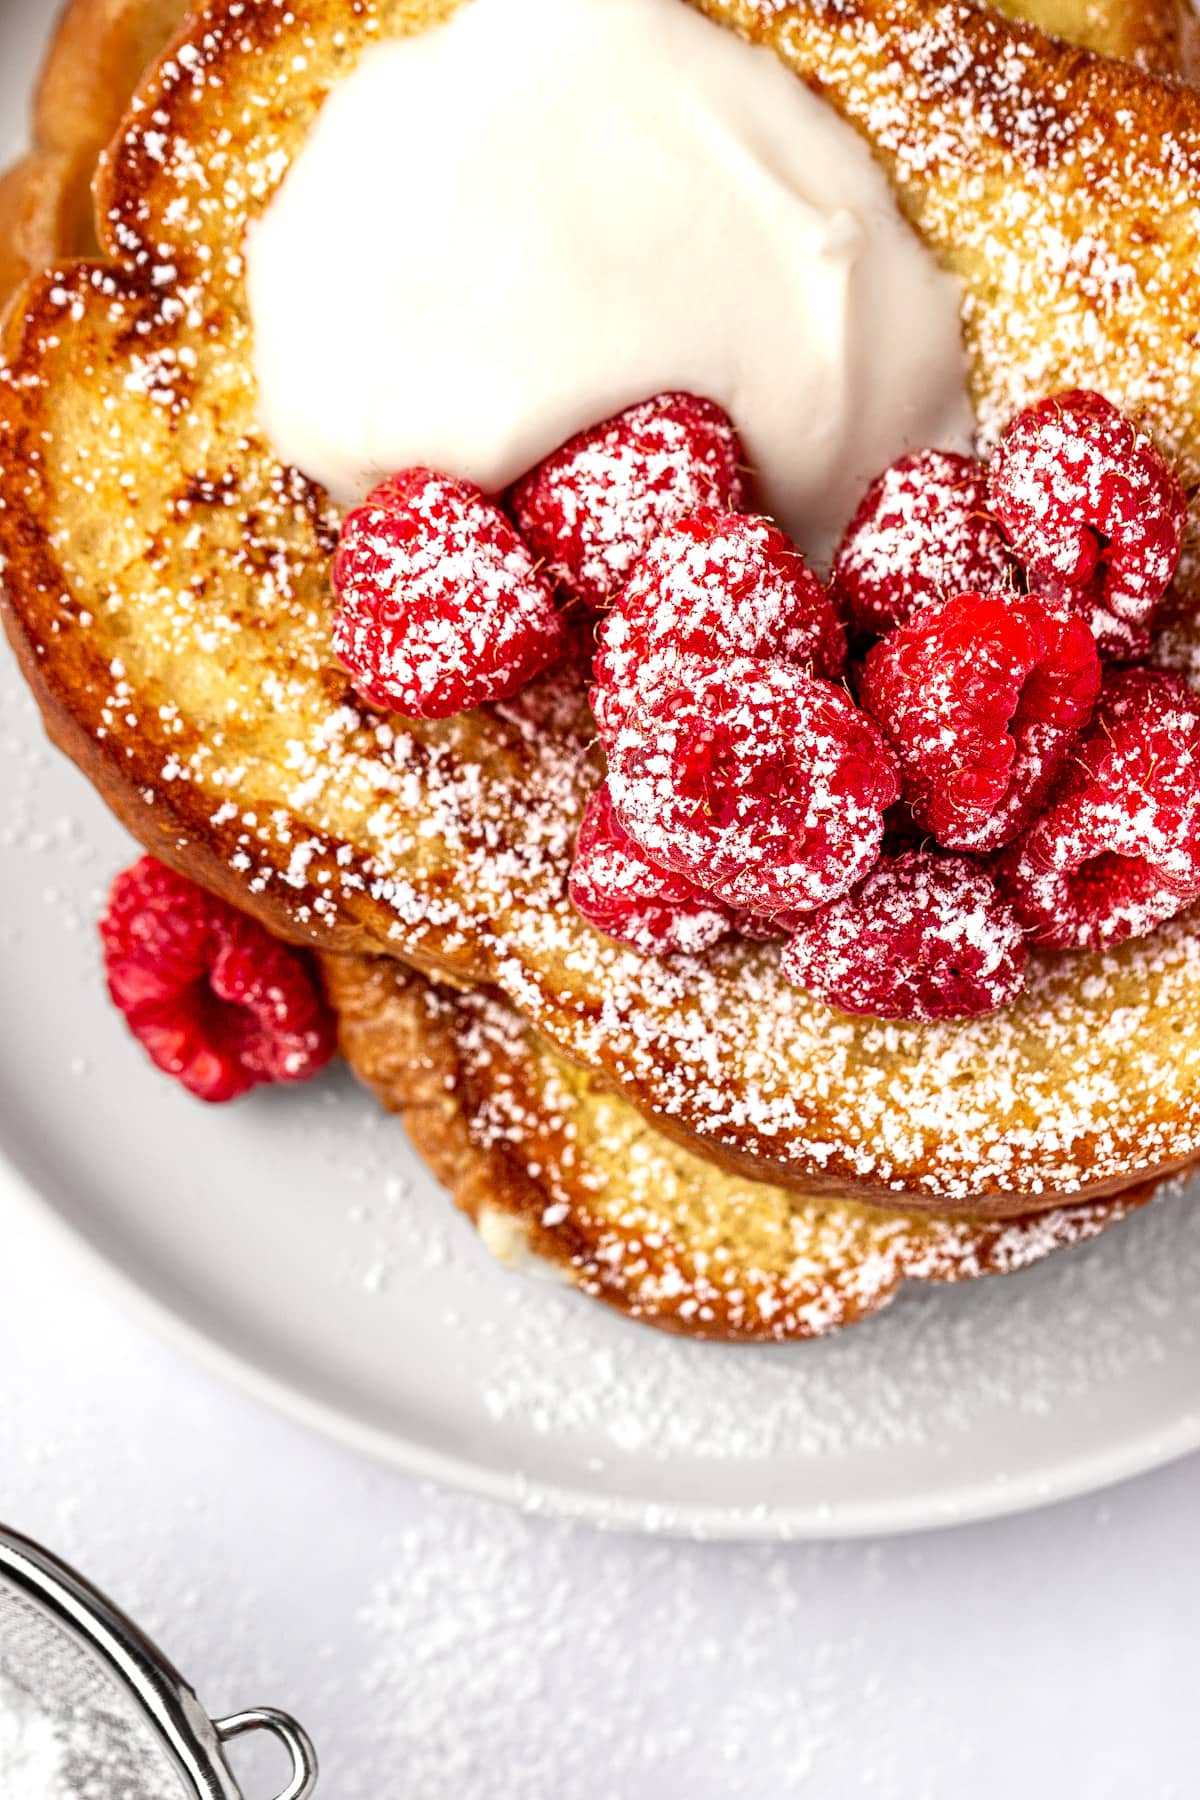 Overhead view of rumchata french toast sprinkled with powdered sugar, on a round white plate.